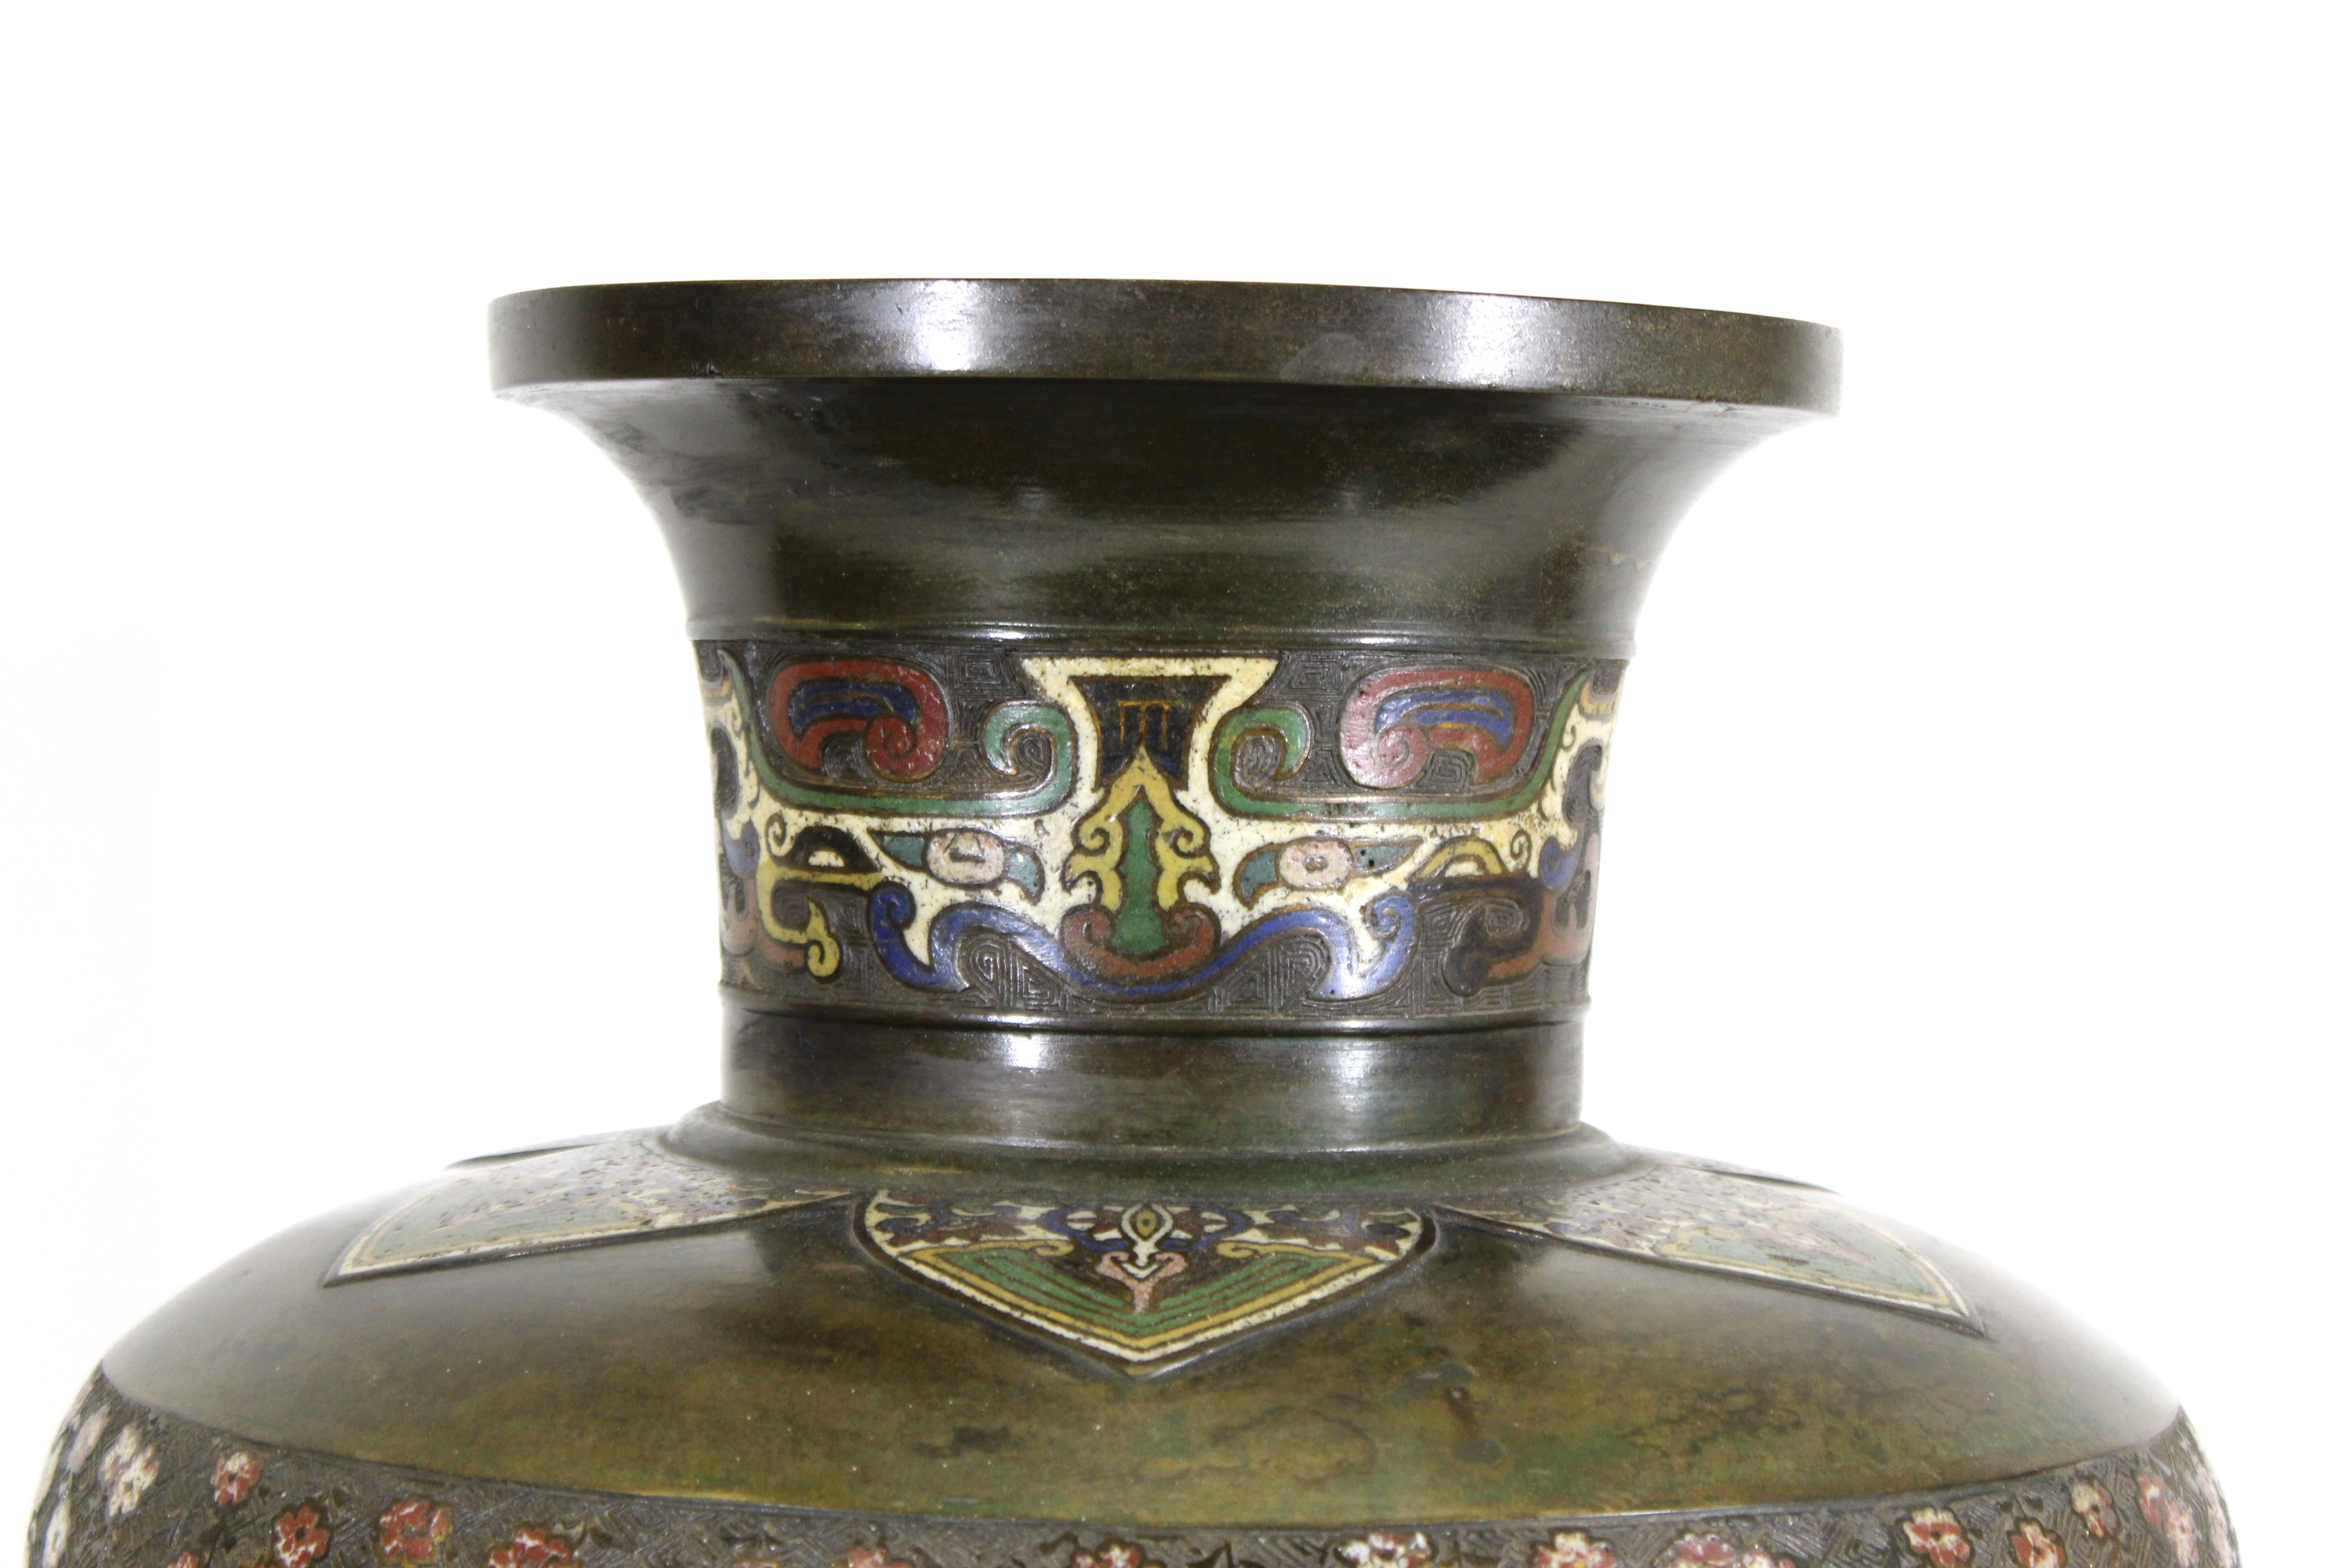 Enameled Japanese Meiji Archaic Chinese Revival Bronze Vase with Champlevé Enamel Scenes